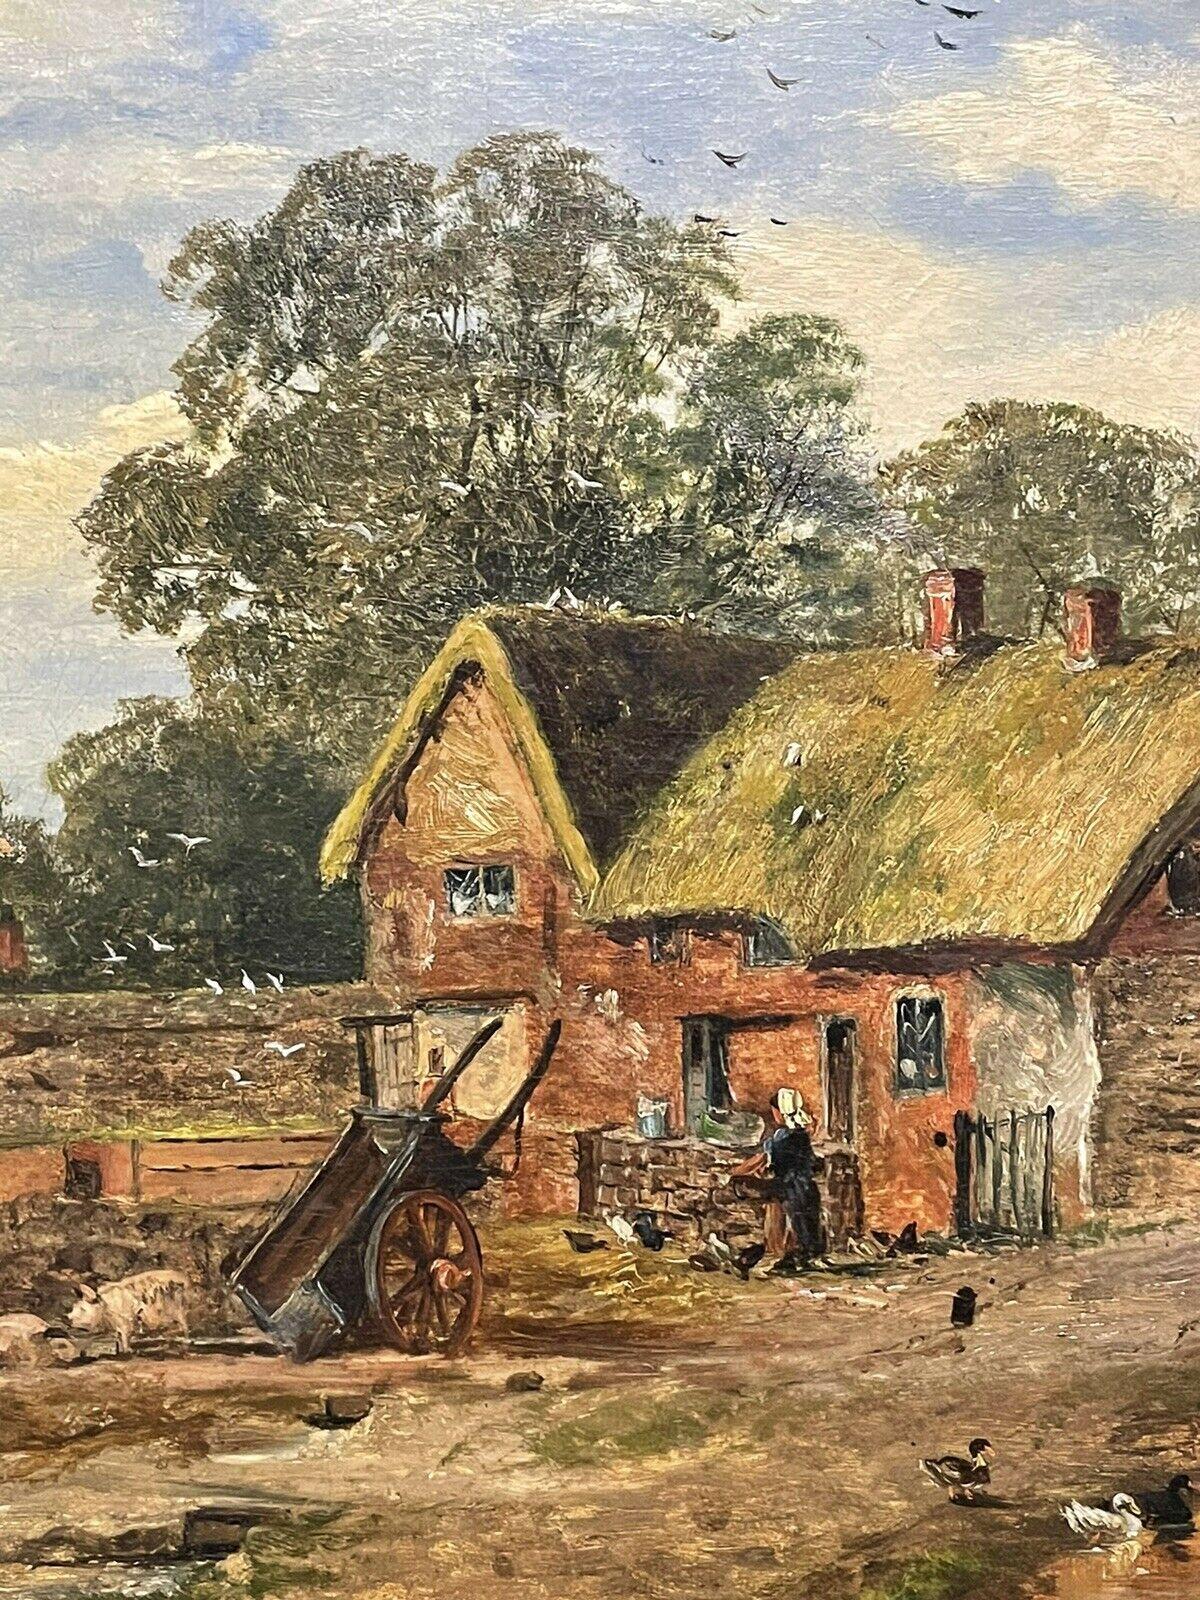 SIGNED VICTORIAN ENGLISH OIL PAINTING - FARMYARD SCENE OLD BUILDINGS -DATED 1875 - Victorian Painting by T Turner